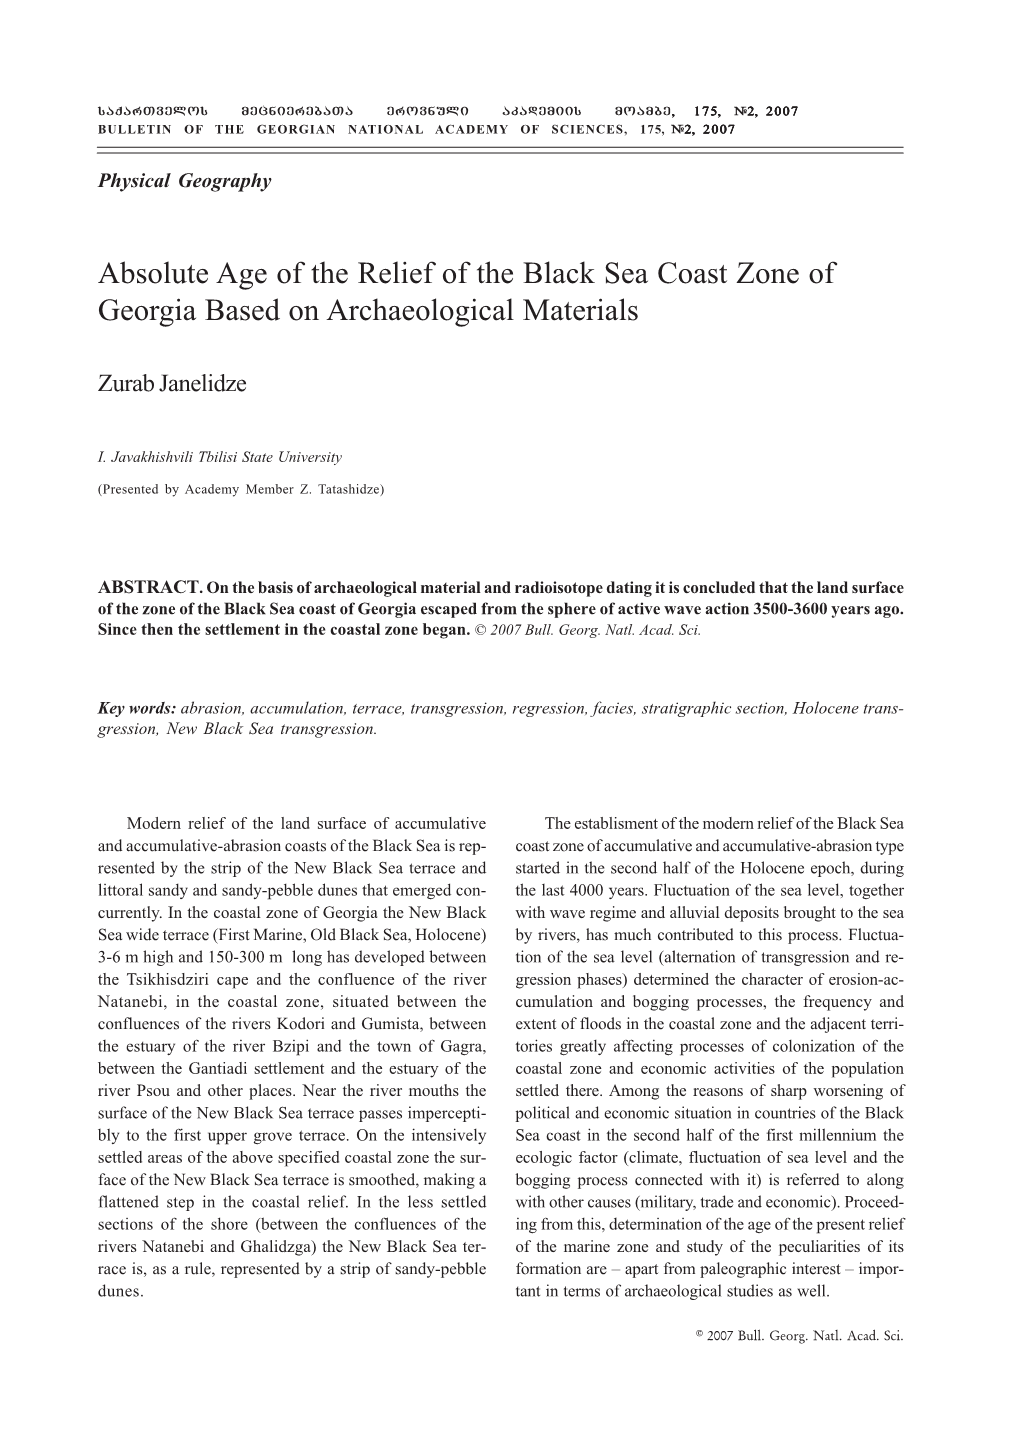 Absolute Age of the Relief of the Black Sea Coast Zone of Georgia Based on Archaeological Materials